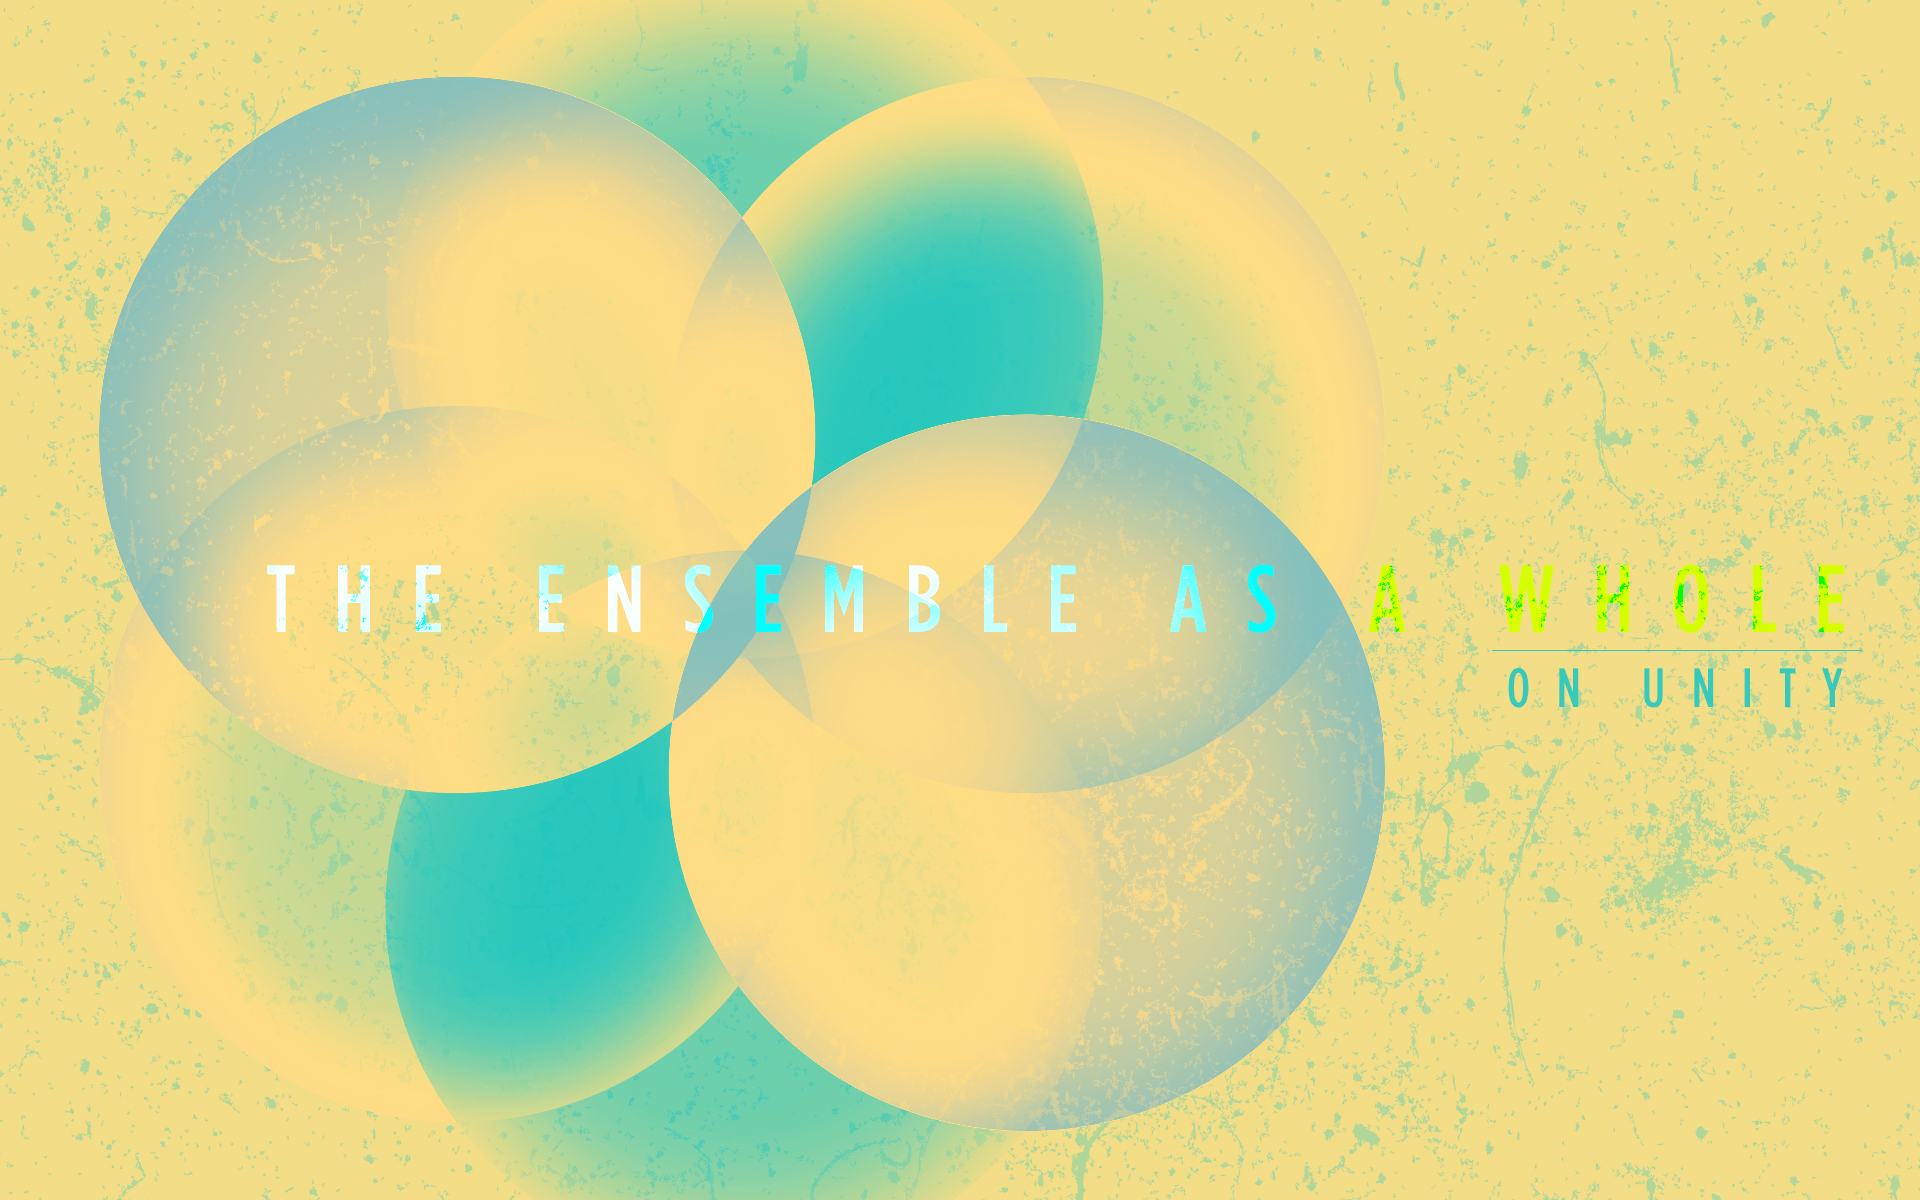 Issue.03: The Ensemble as a Whole: On Unity